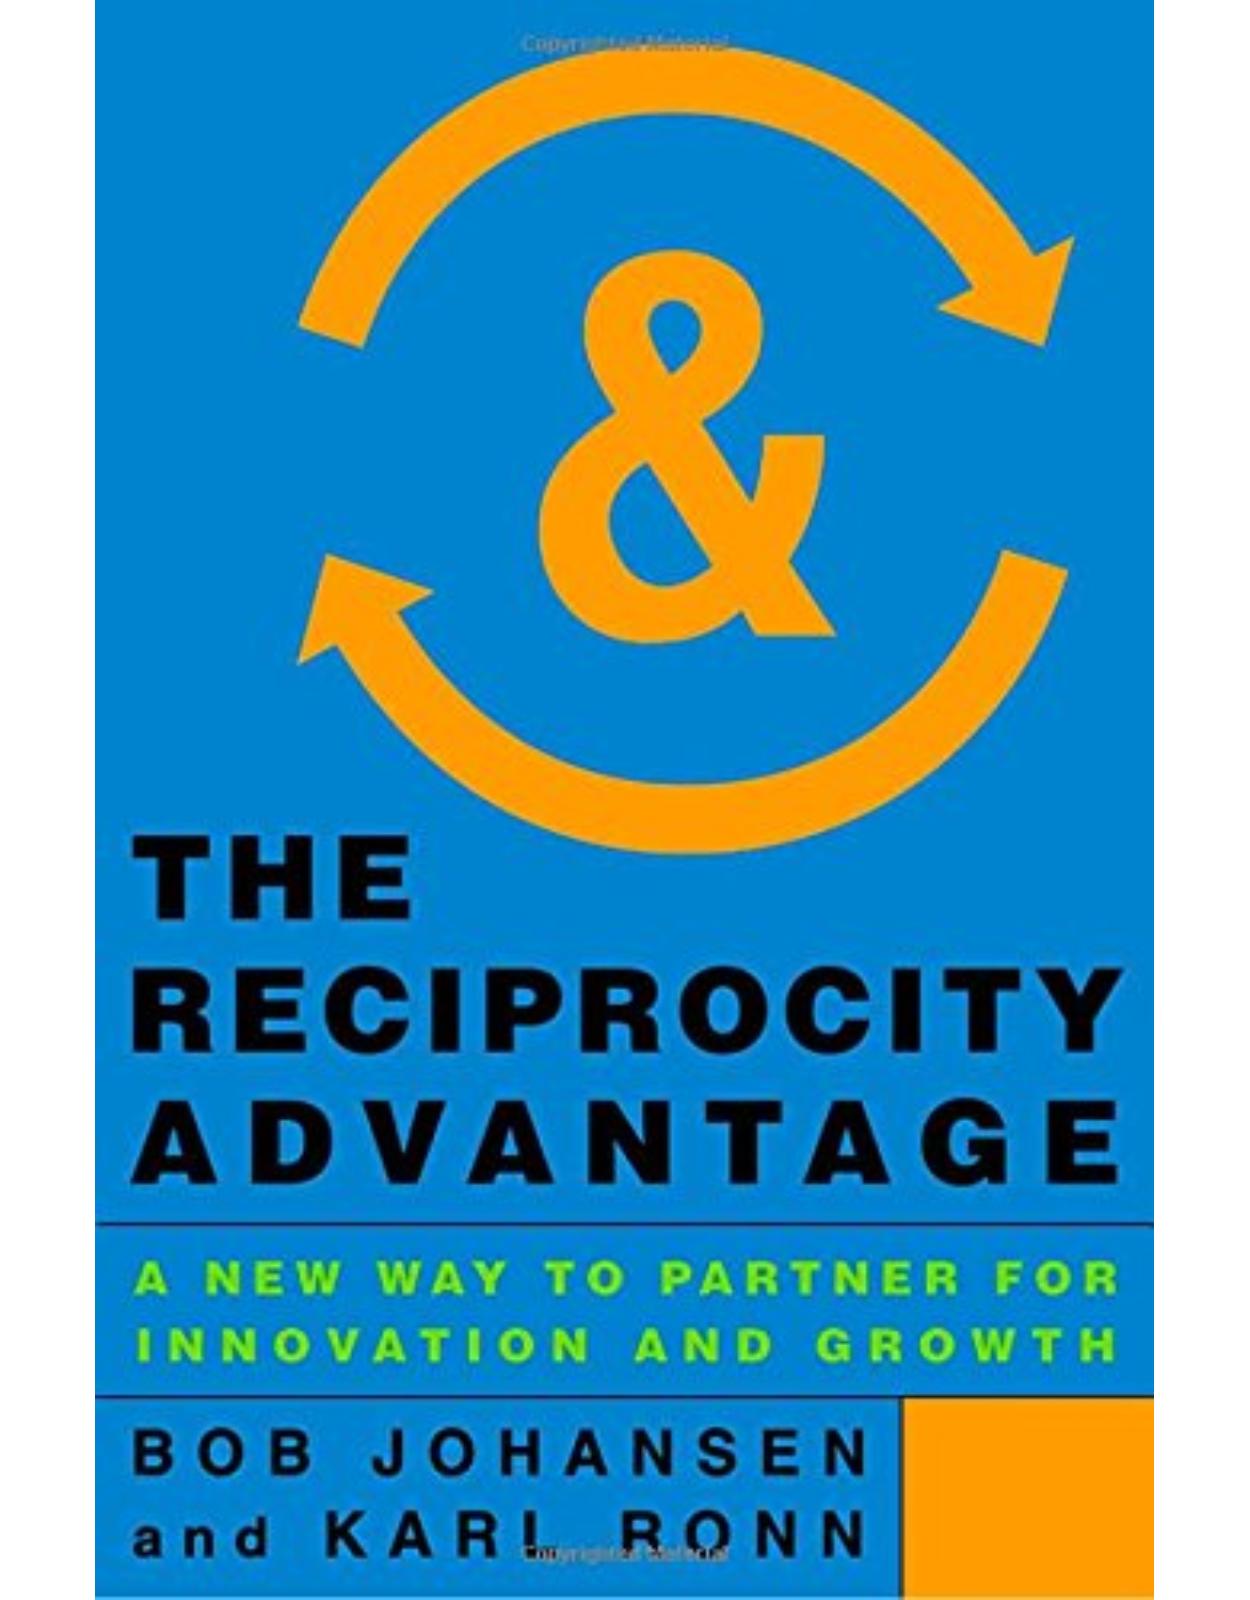 The Reciprocity Advantage: A New Way to Partner for Innovation and Growth